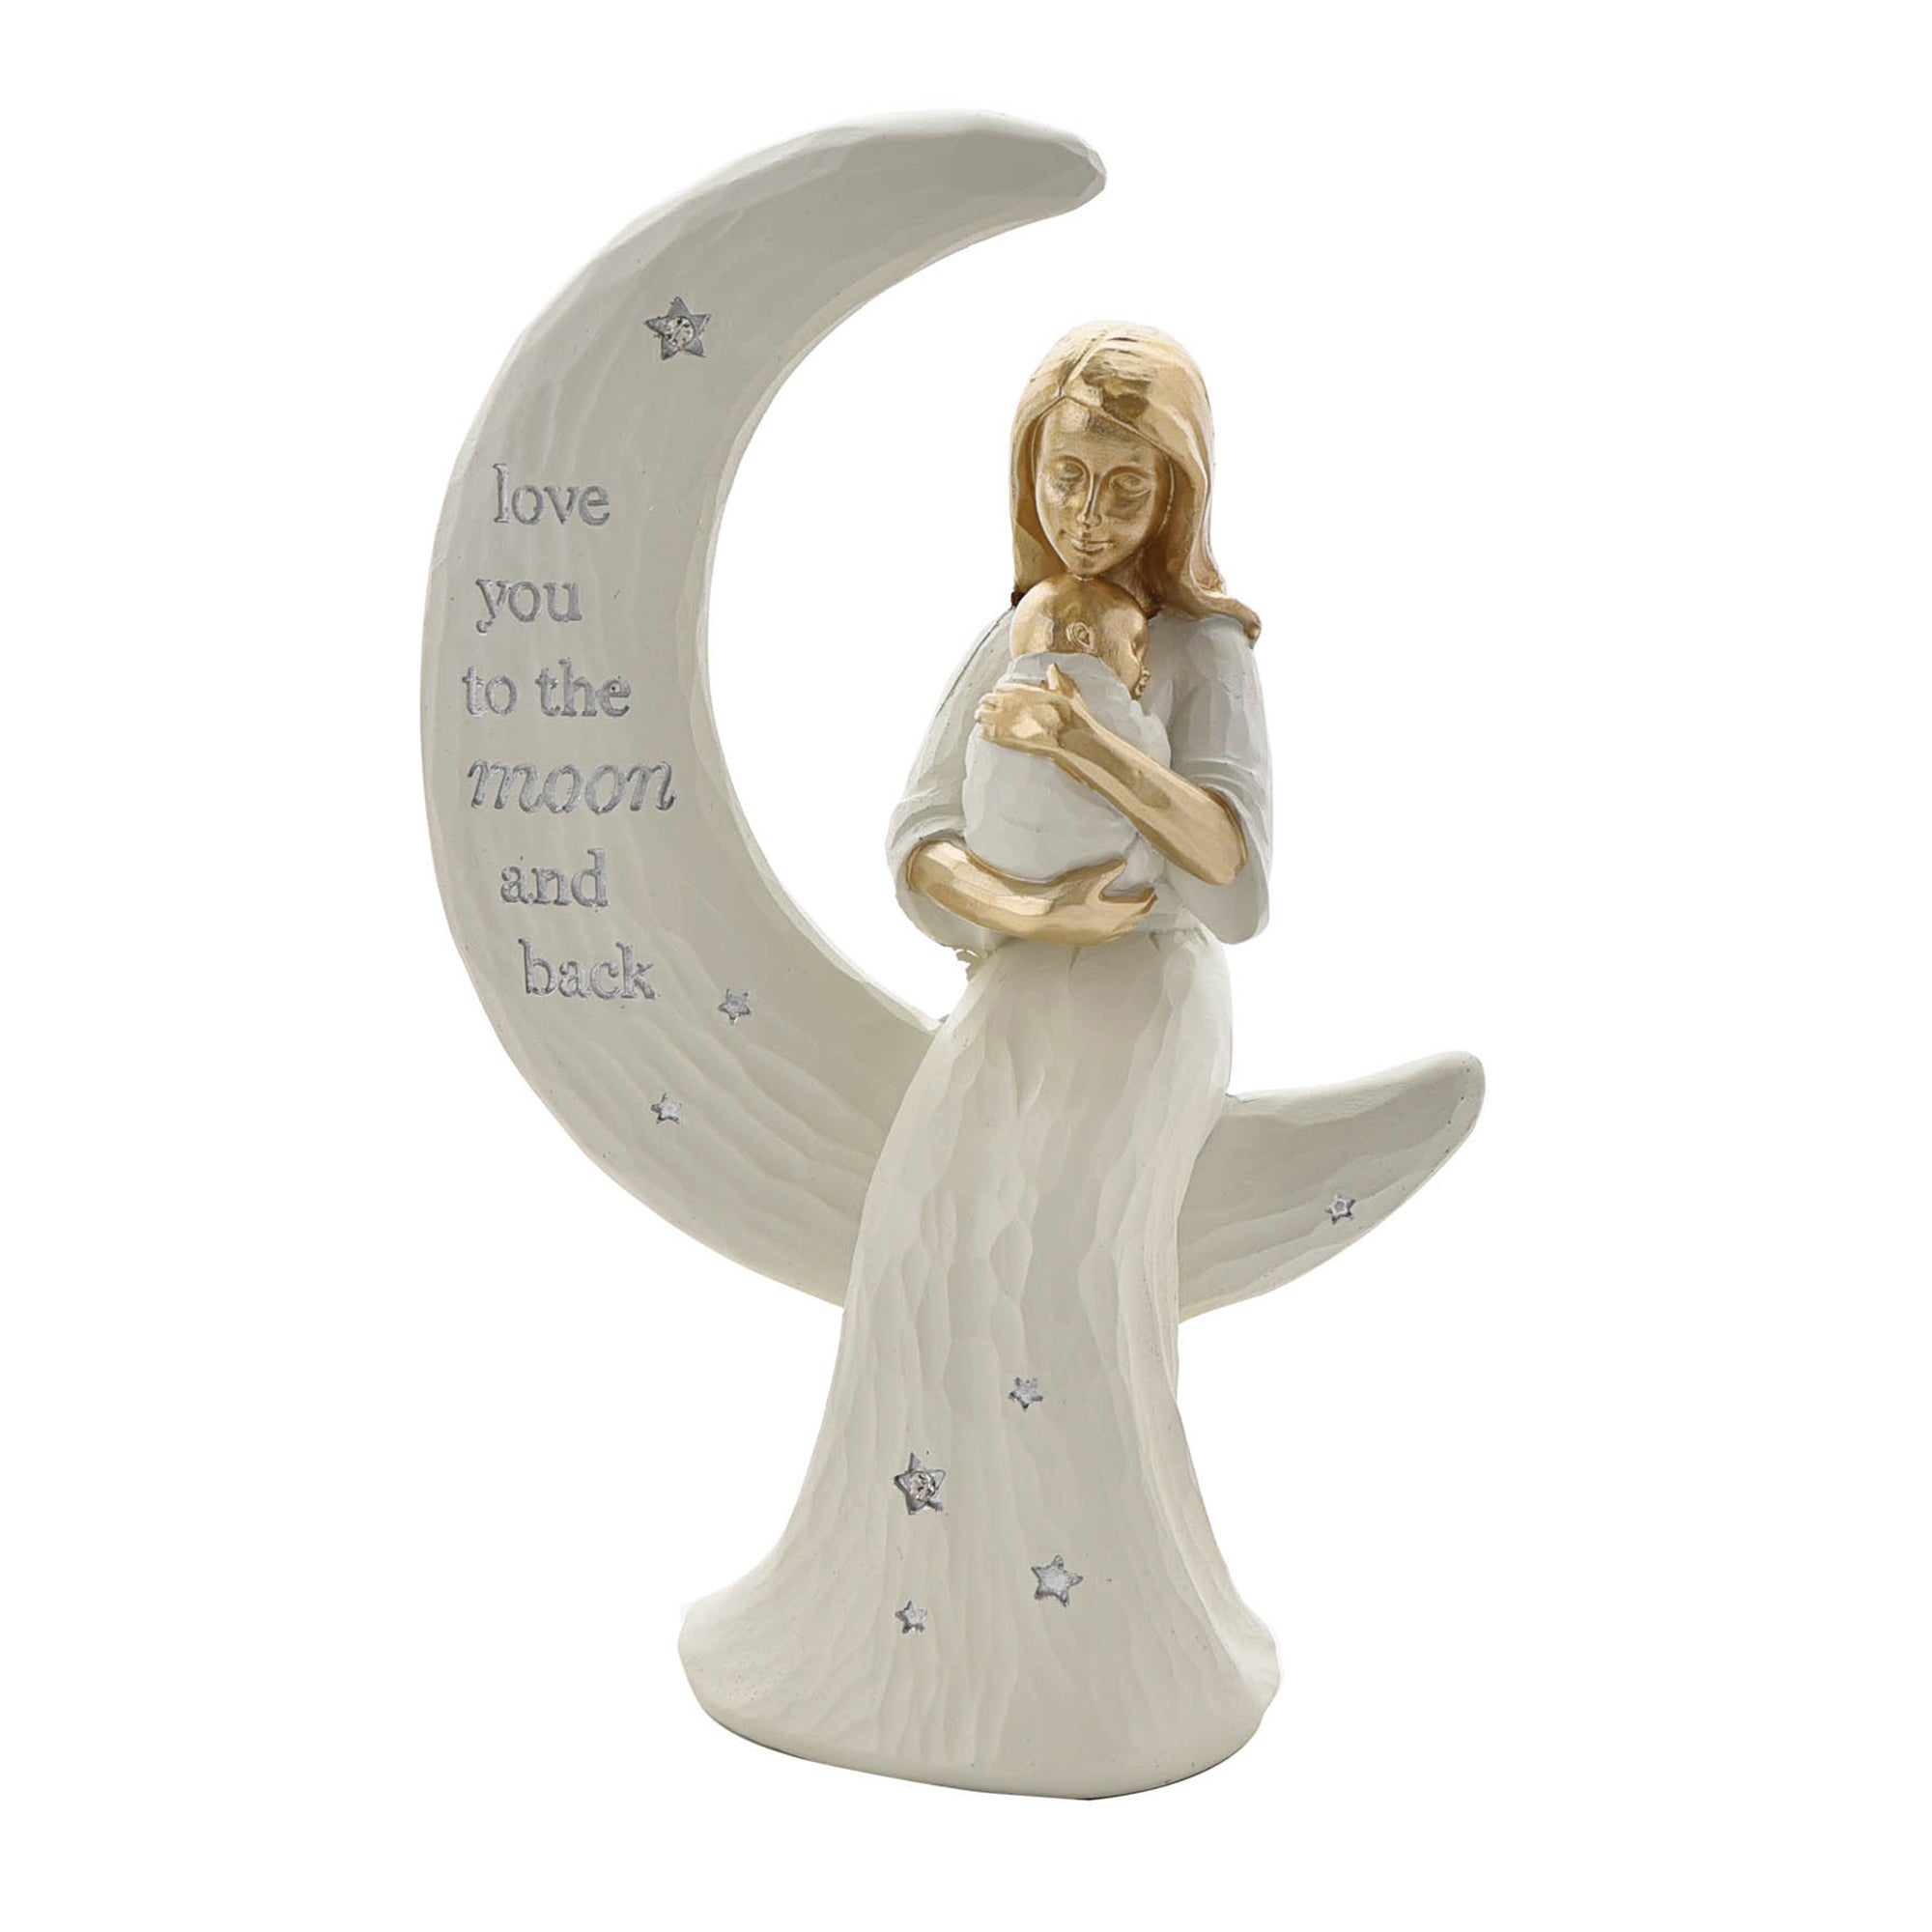 Bambino Mother and Baby Sitting on Moon Figurine "Love You"